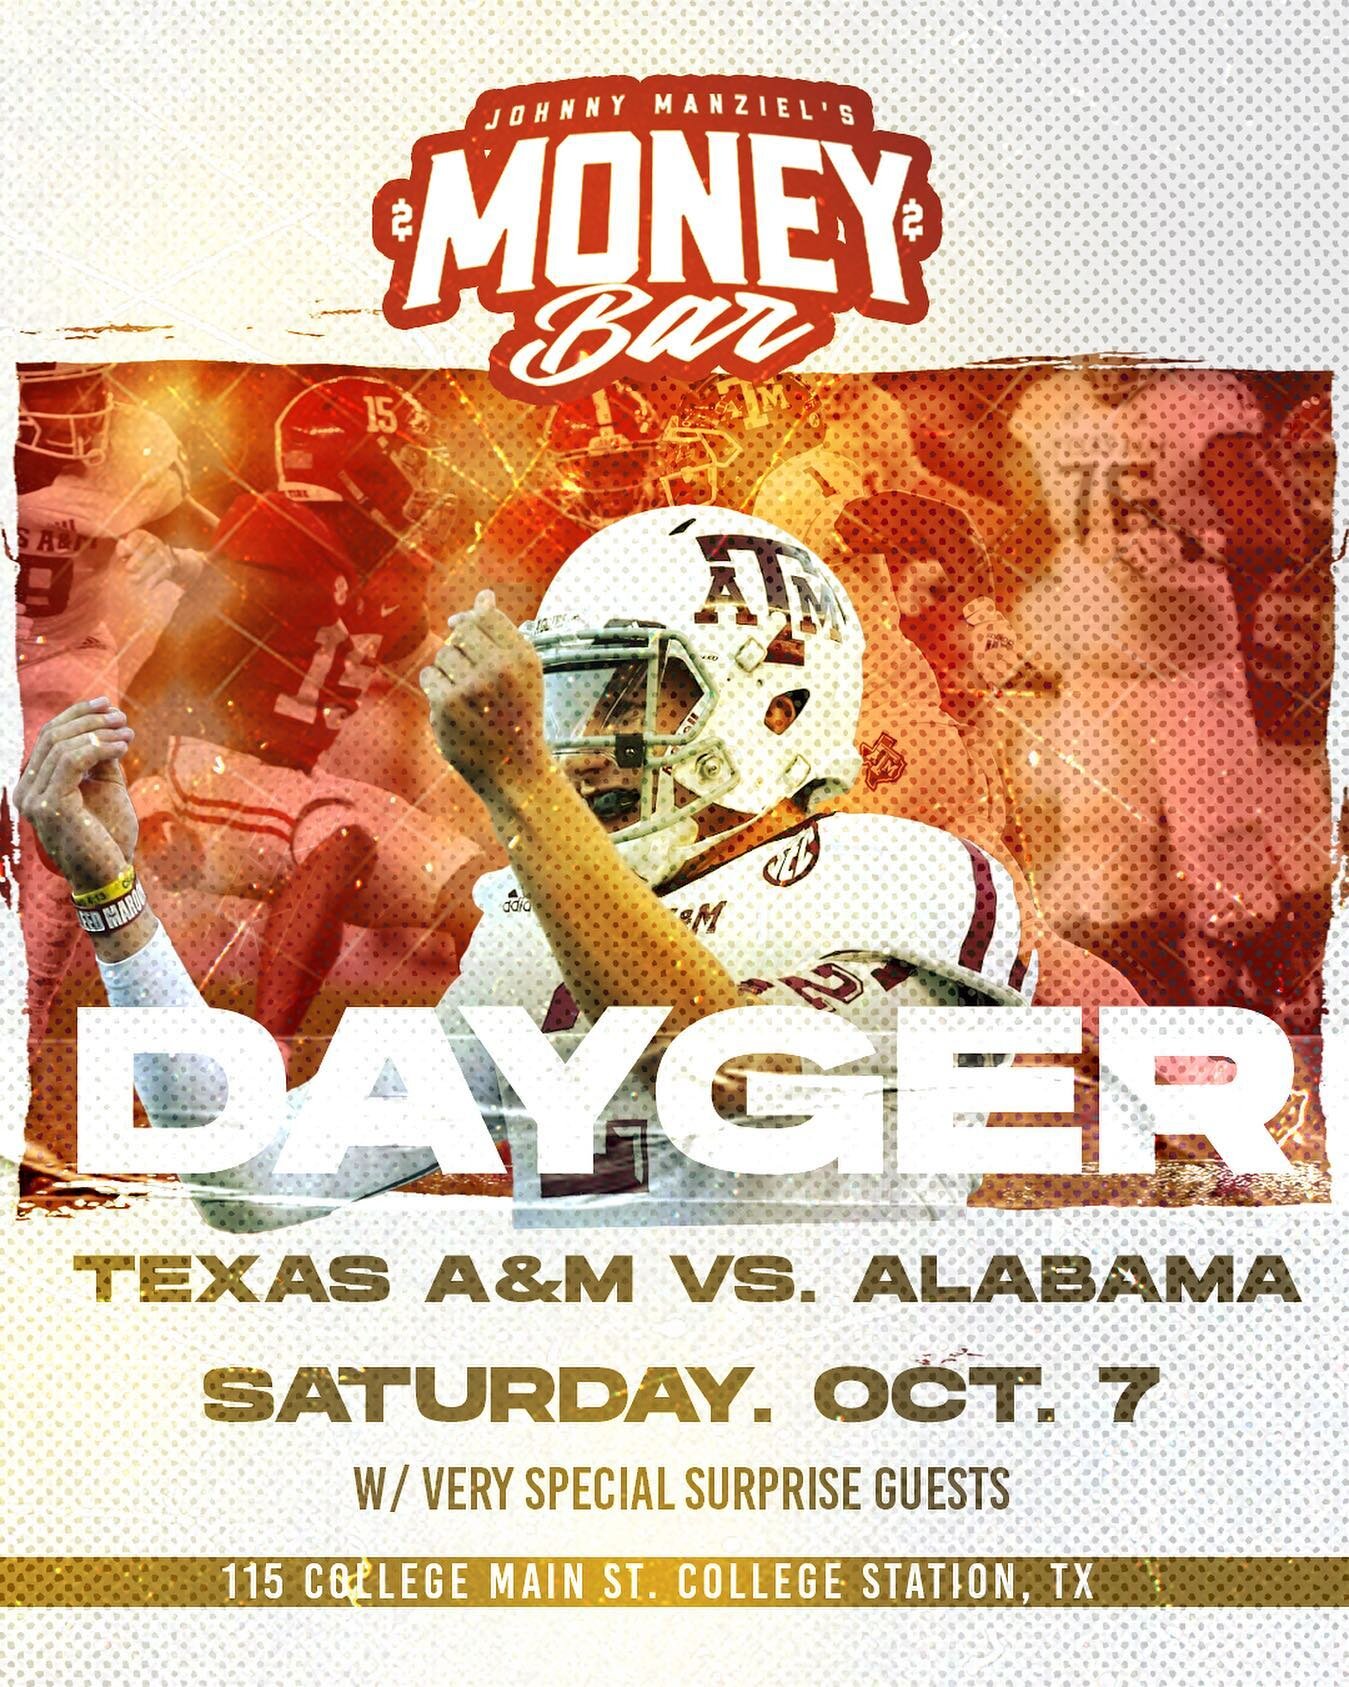 We are partying ALLL DAY LONG this Saturday @jmanziel2 💵 Bar! 😎 OPENING AT 10am!